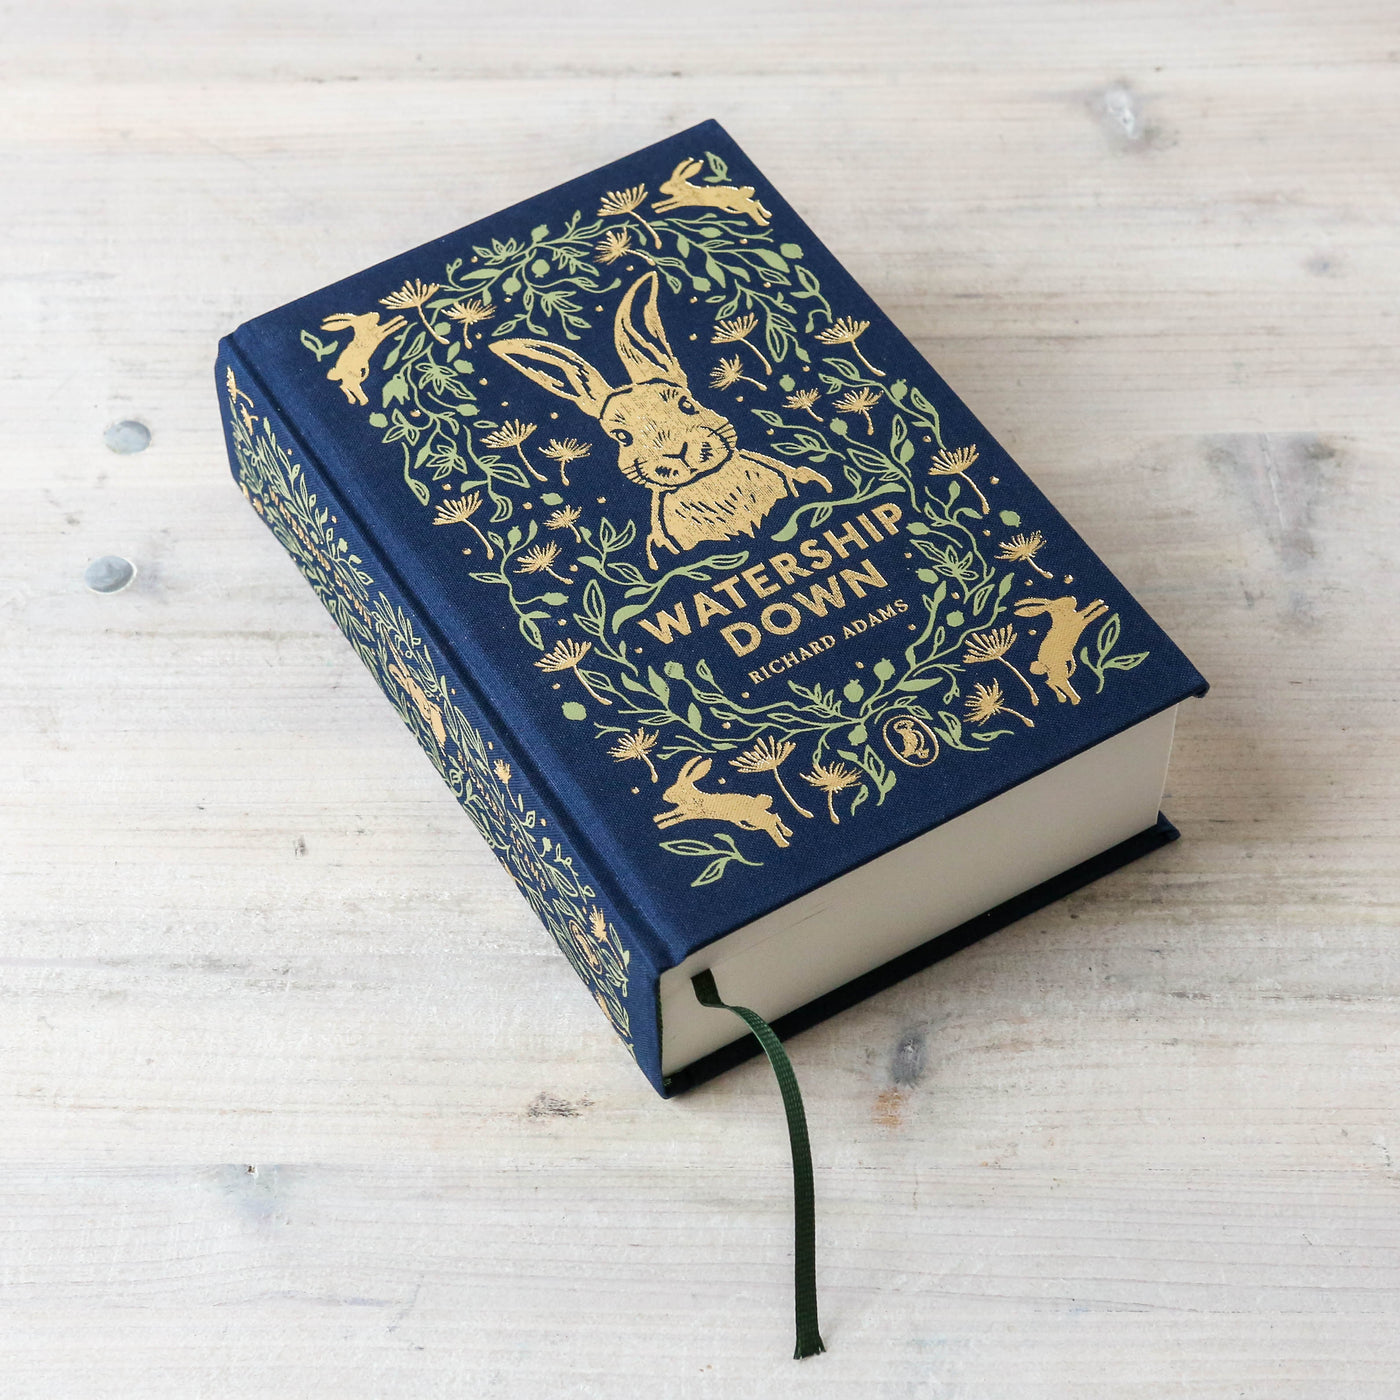 Collect a Rainbow - Watership Down Clothbound